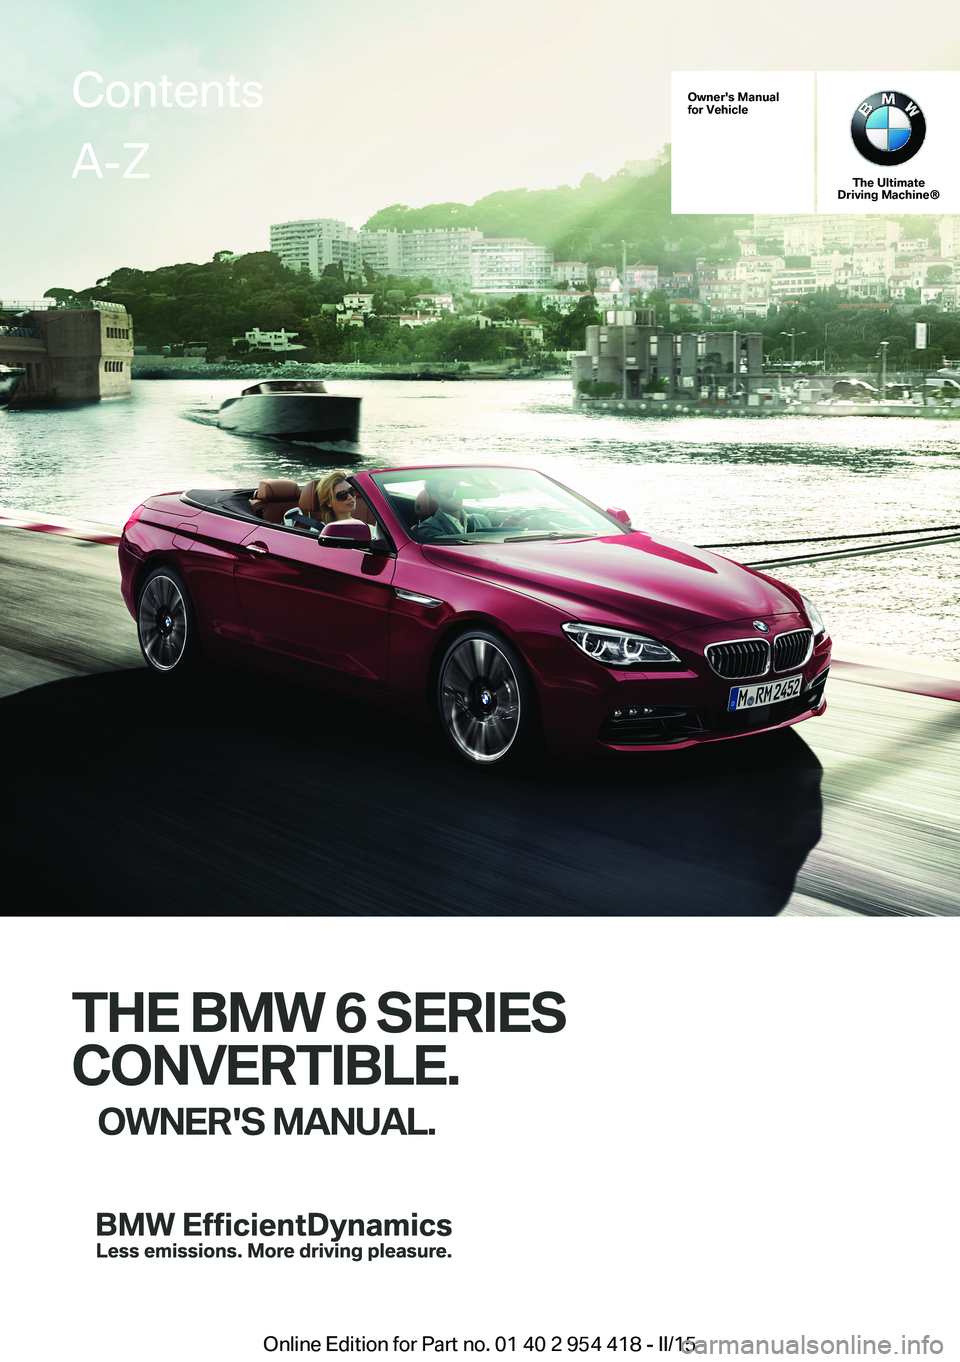 BMW 650I CONVERTIBLE 2015  Owners Manual Owner's Manualfor Vehicle
The UltimateDriving Machine®
THE BMW 6 SERIES
CONVERTIBLE.
OWNER'S MANUAL.
ContentsA-Z
Online Edition for Part no. 01 40 2 954 418 - II/15   